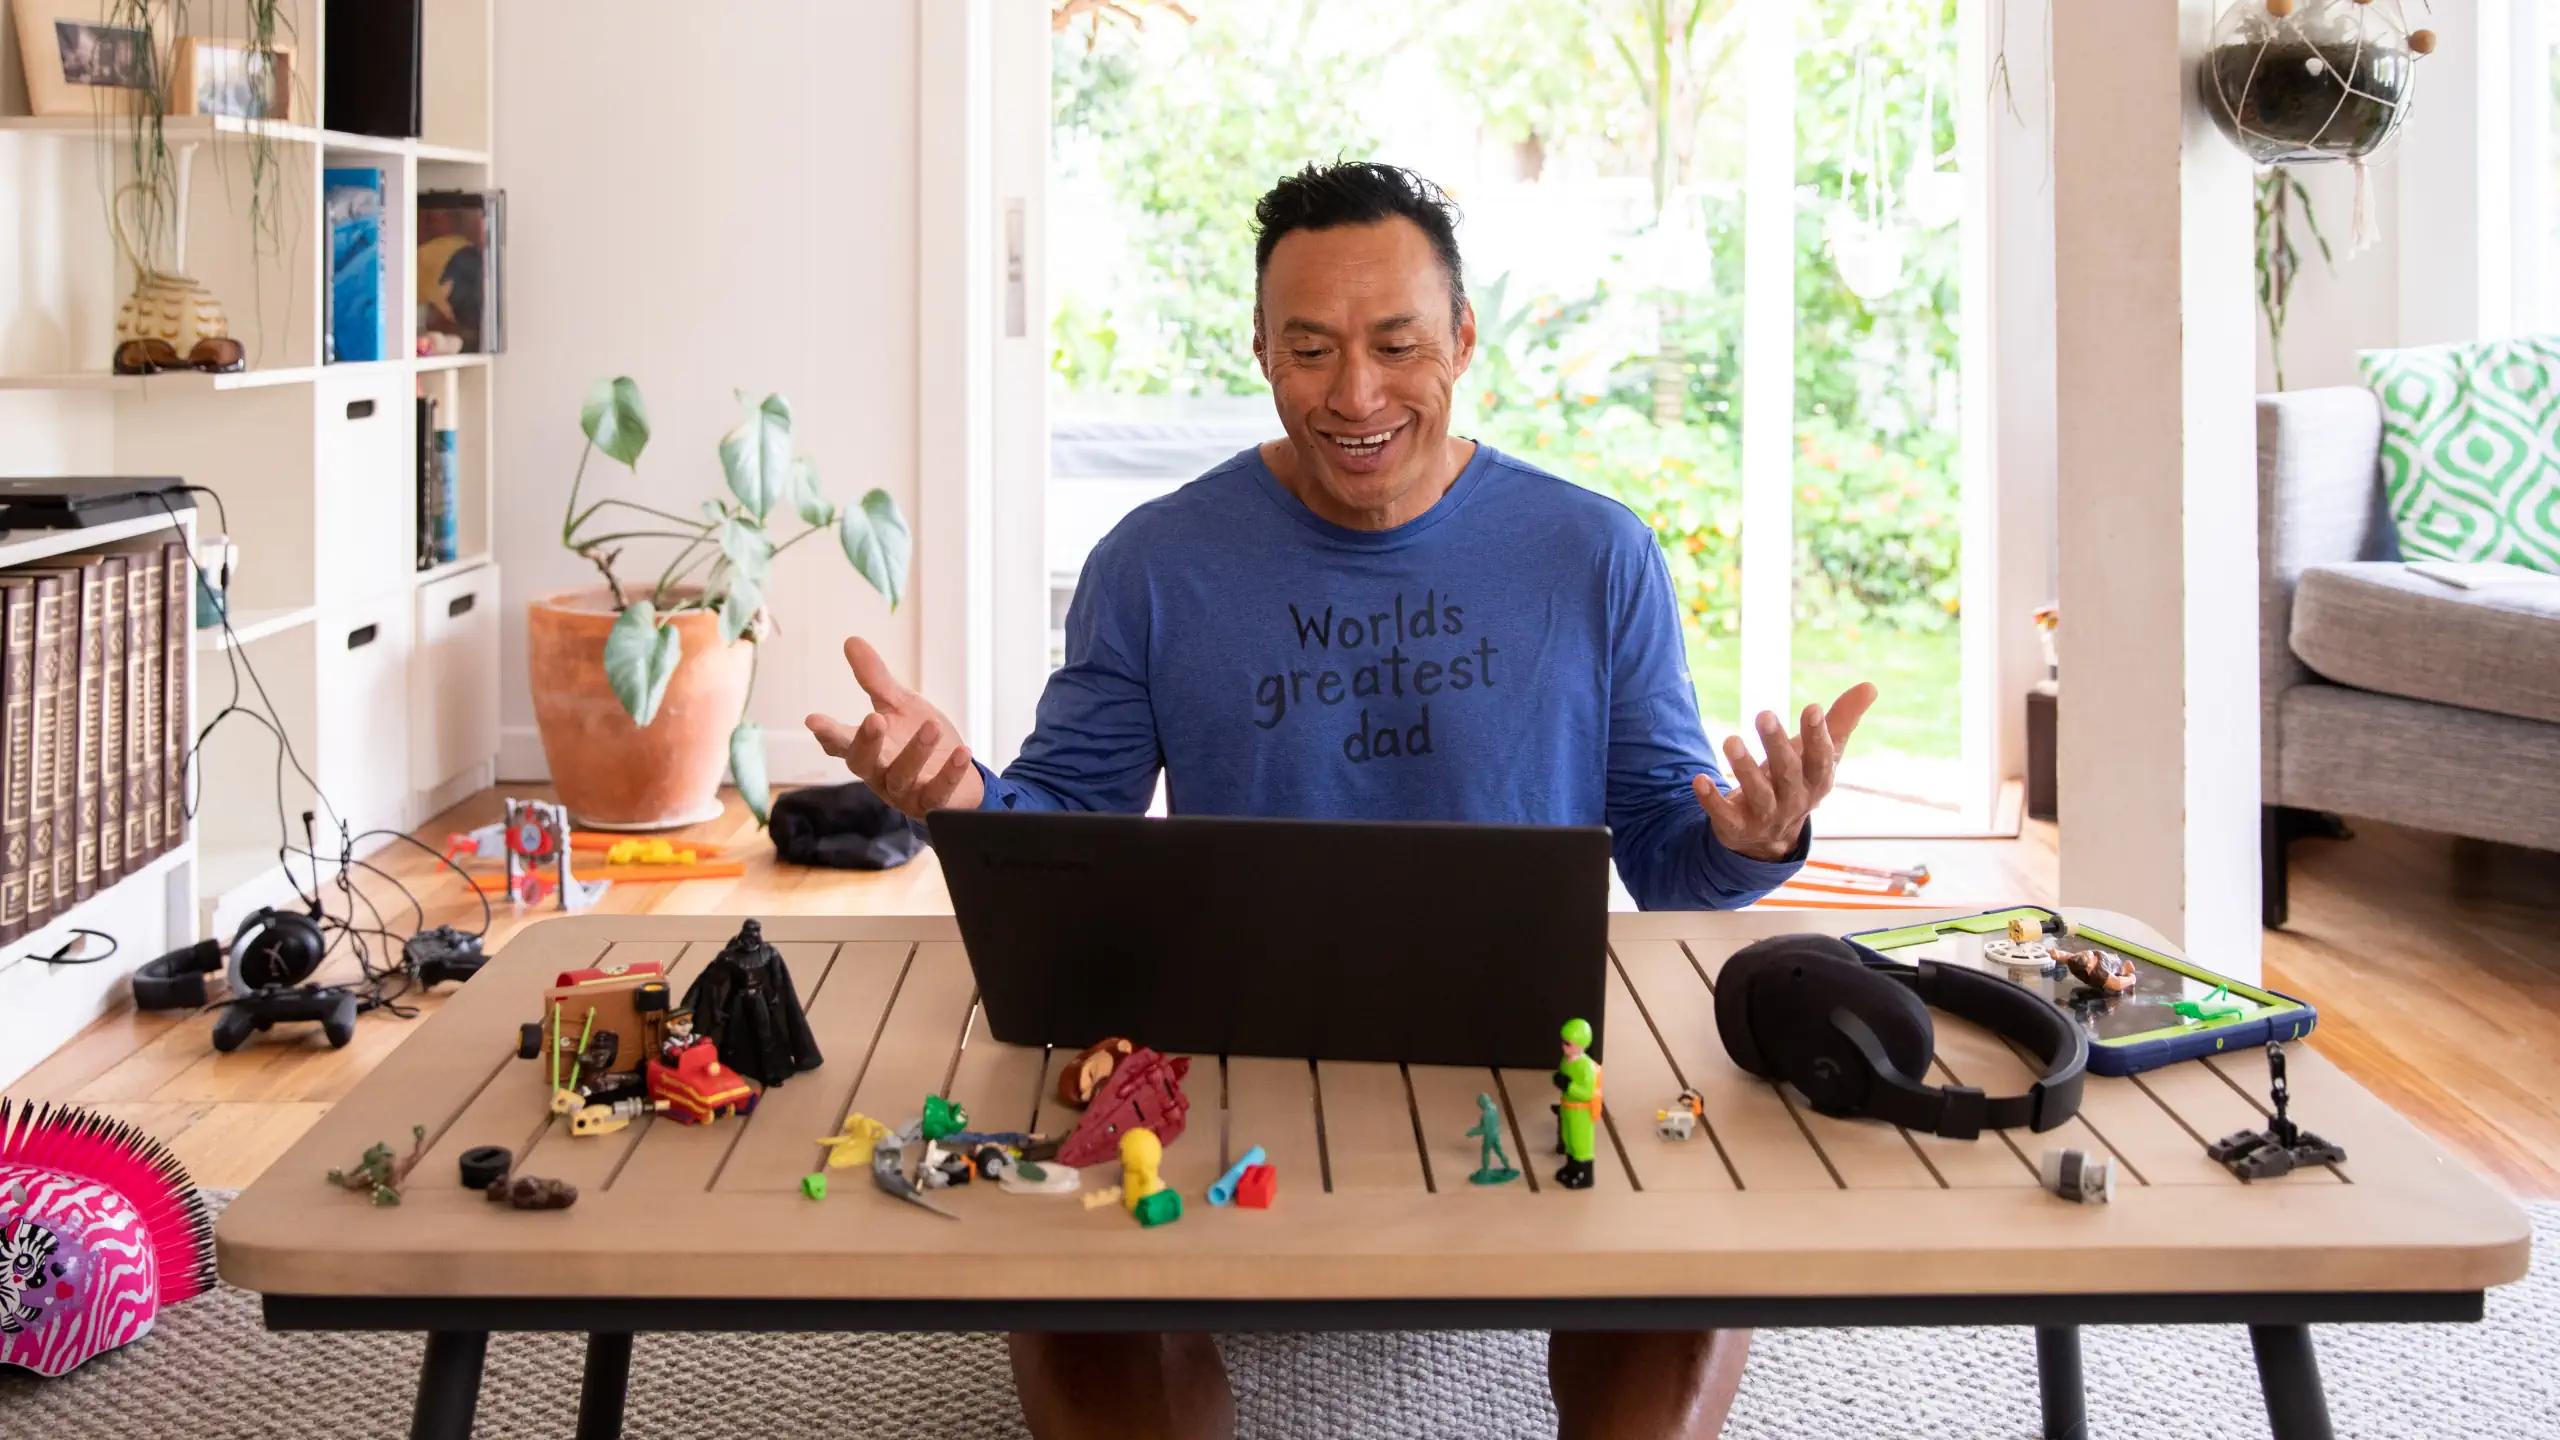 Man at kitchen table looking amused at a laptop with kids toys on the table.